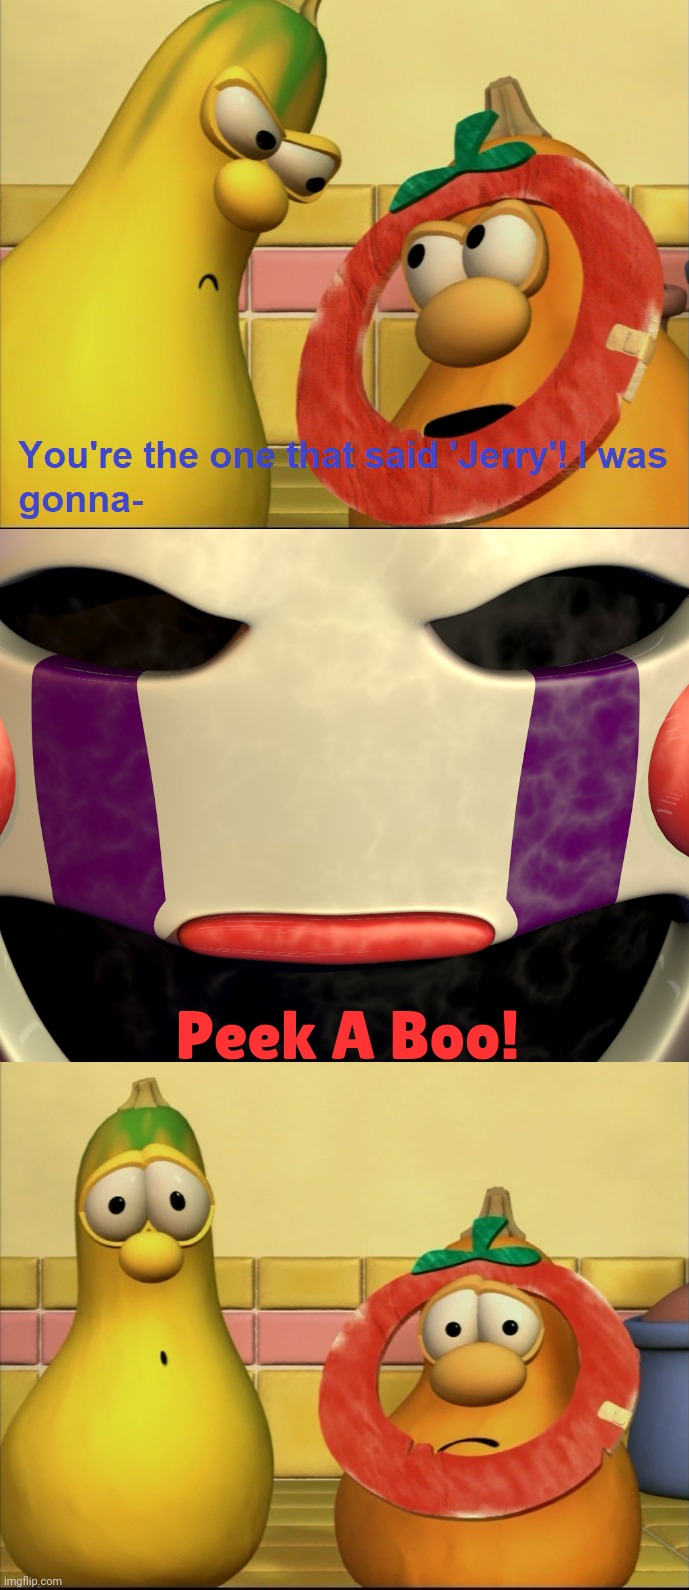 Marionette interrupts Jimmy and Jerry | Peek A Boo! | image tagged in marionette,jimmy gourd,jerry gourd,fnaf,veggietales | made w/ Imgflip meme maker